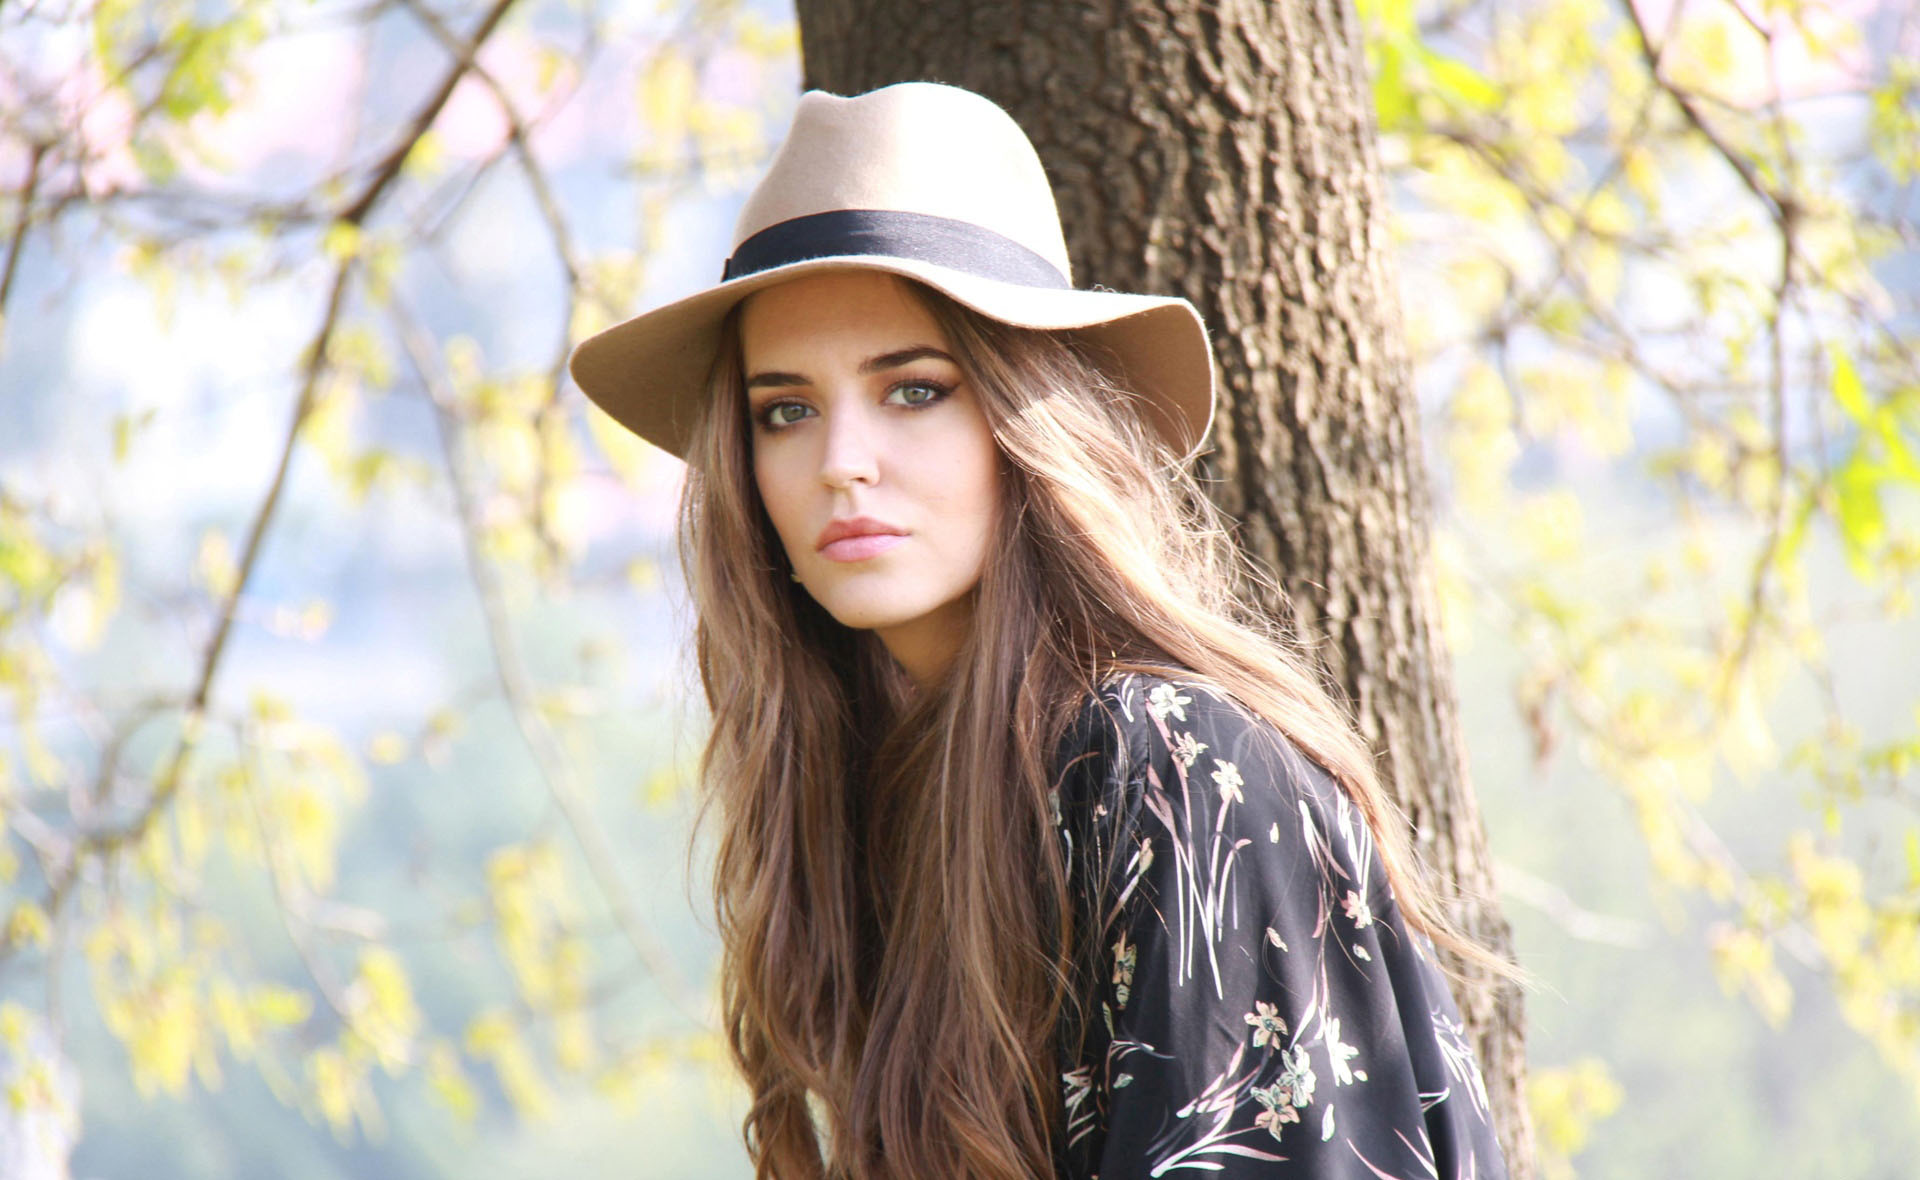 models wallpaper female,people in nature,clothing,hat,beauty,fedora